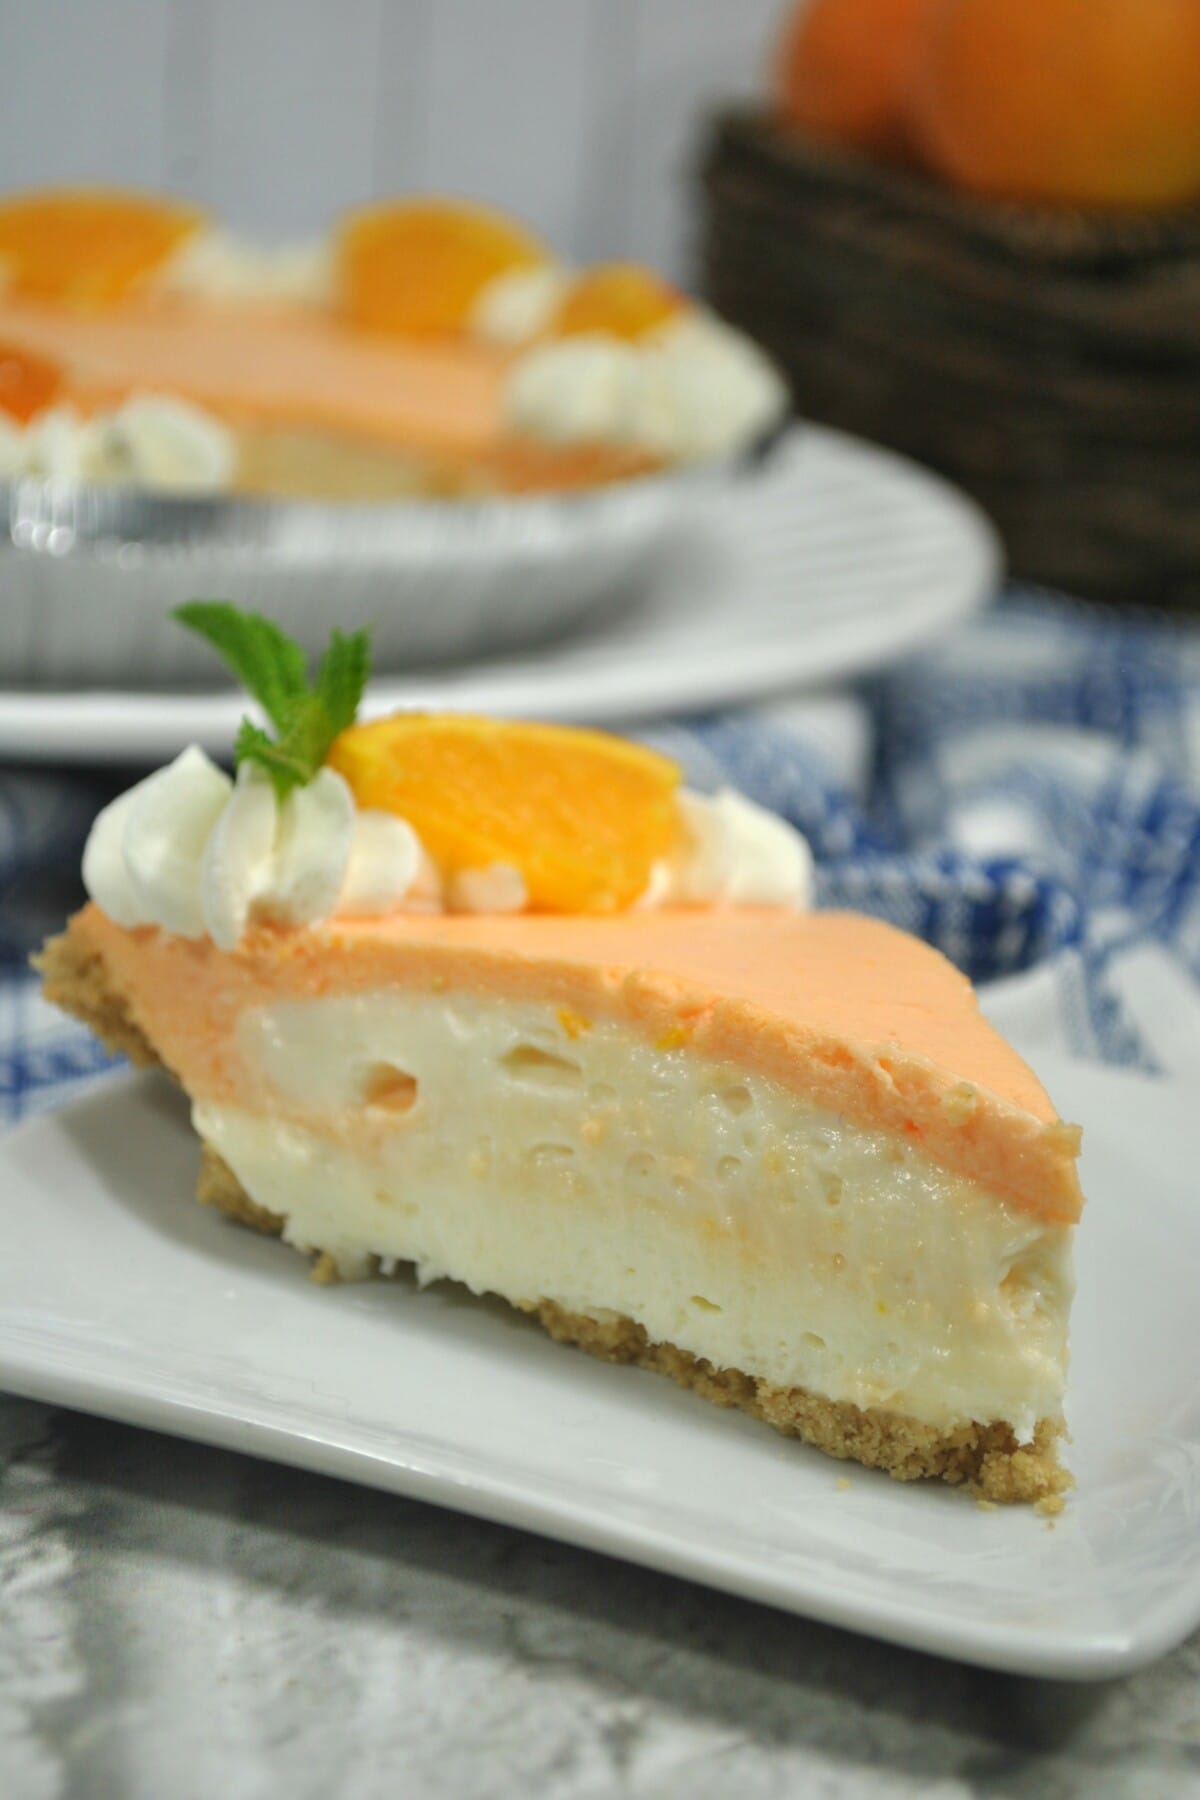 Creamsicle pie slice on a plate